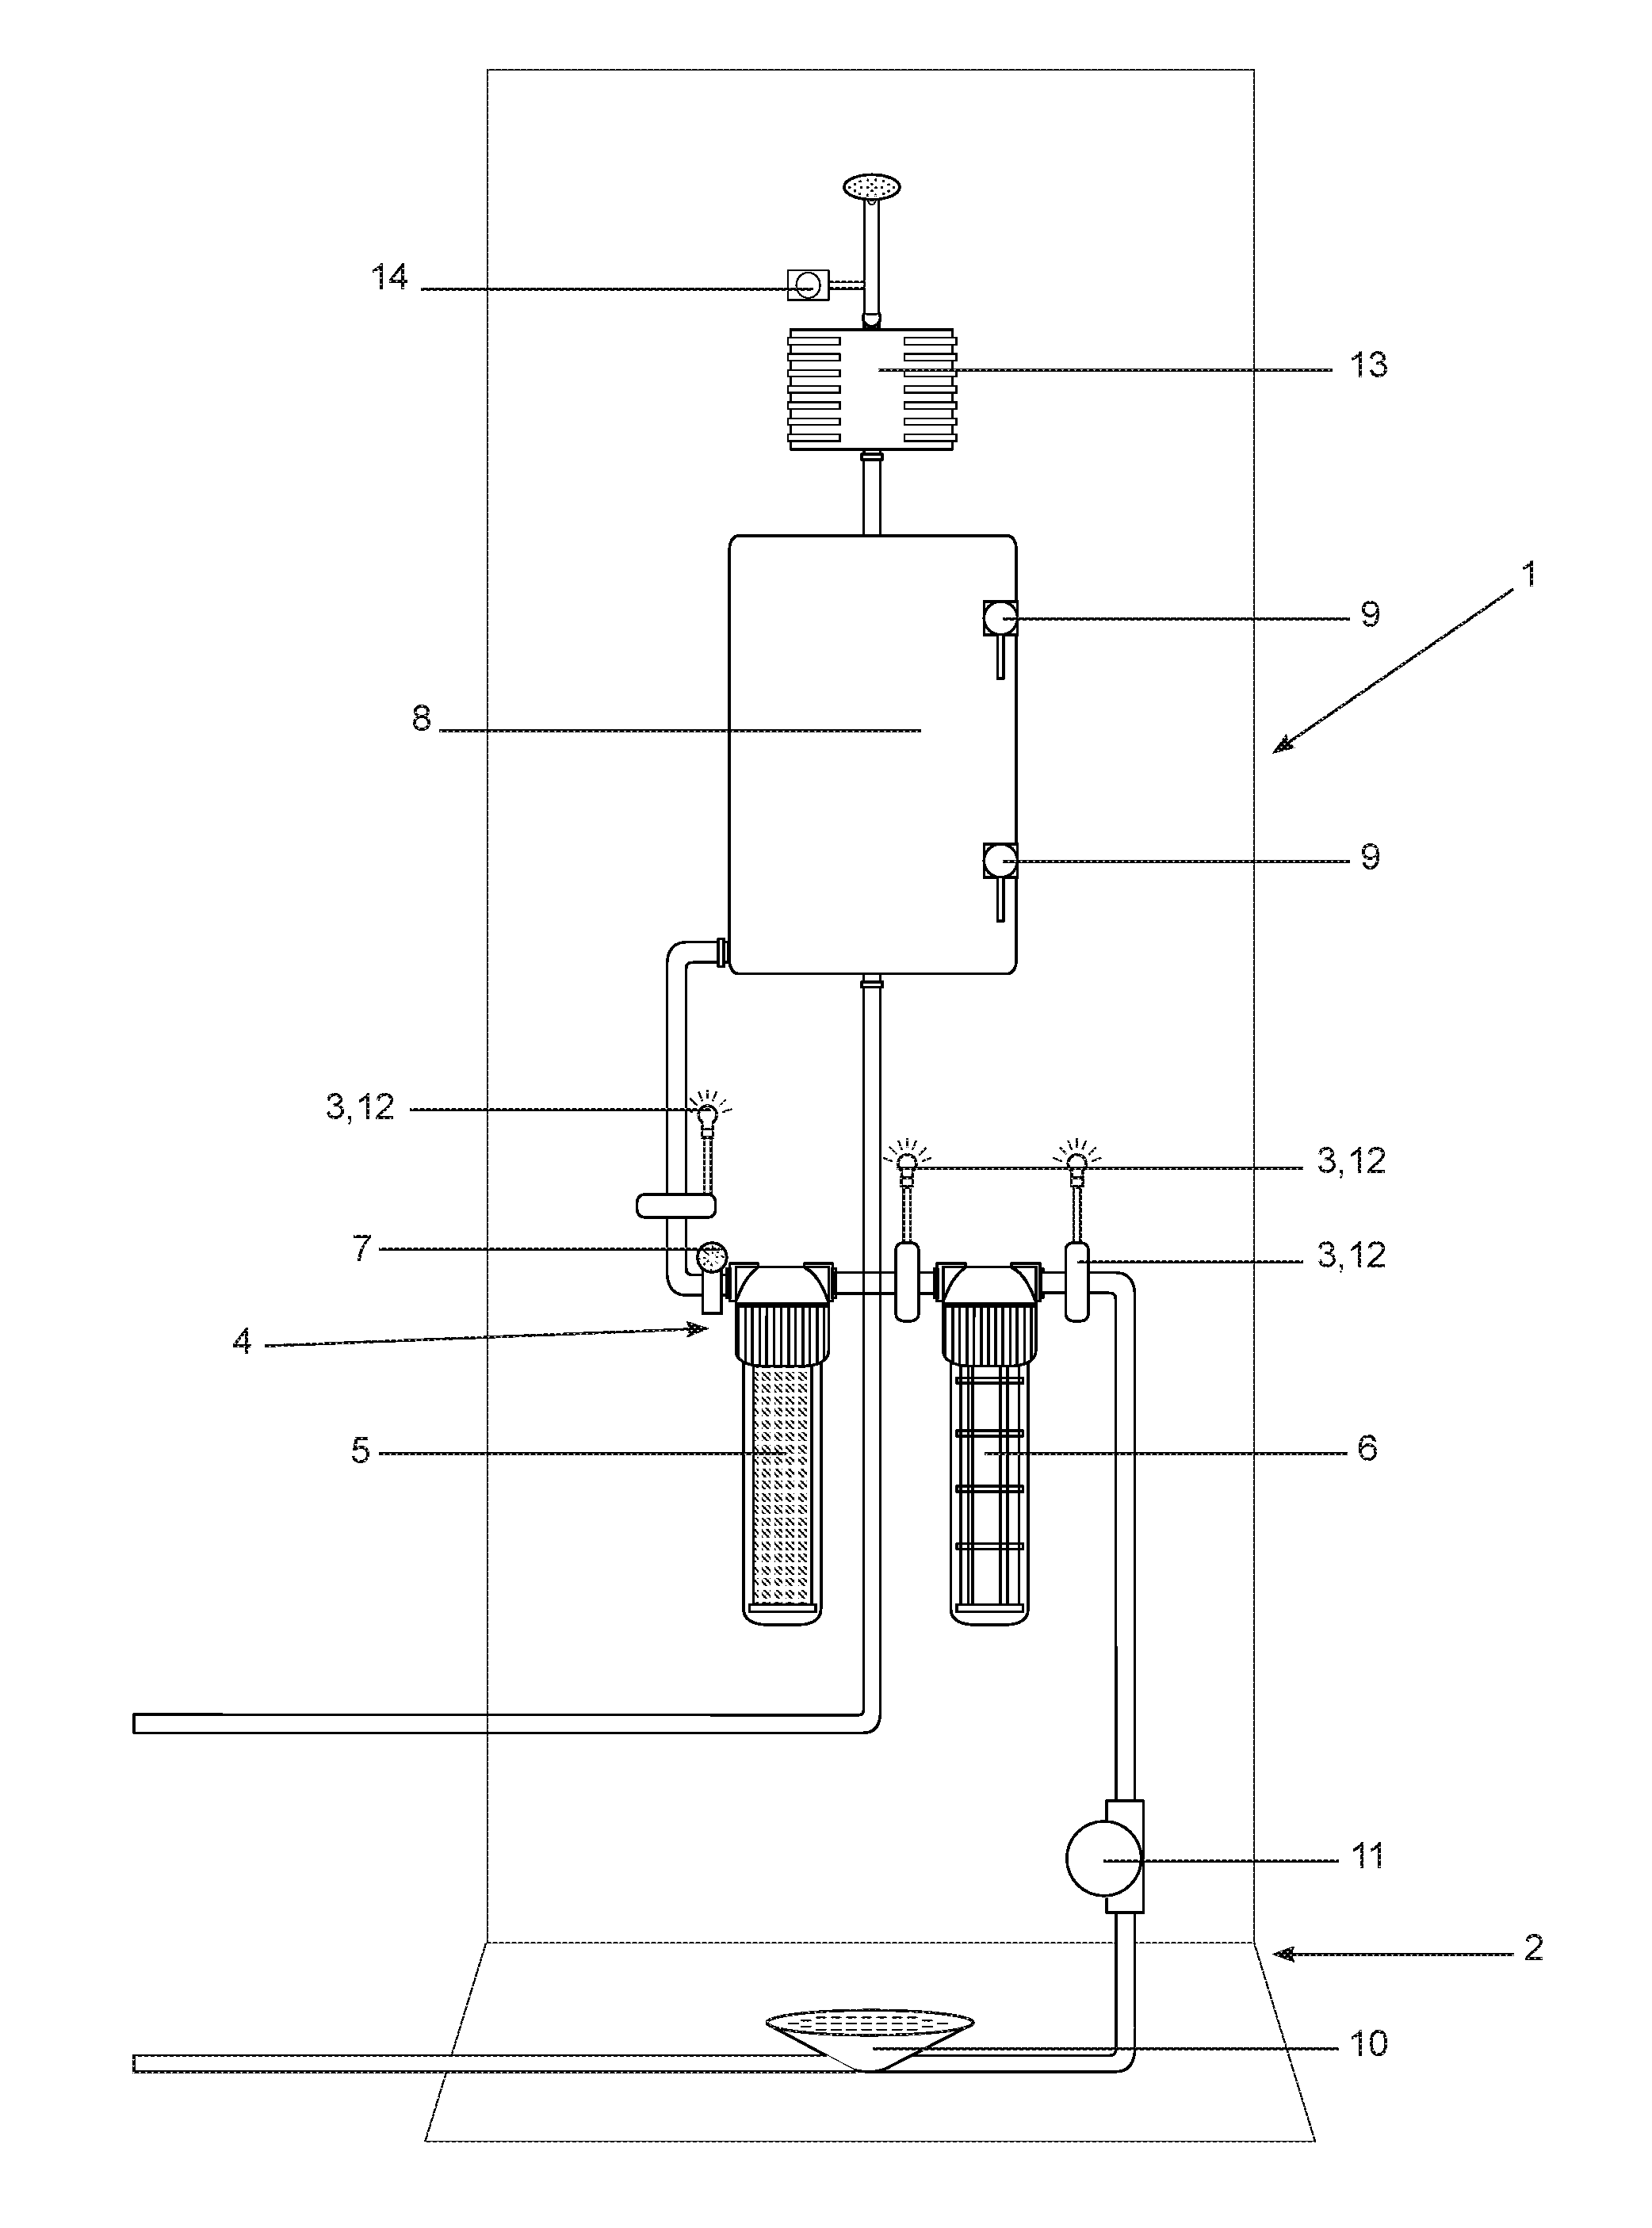 Device and method for purifying and recycling shower water